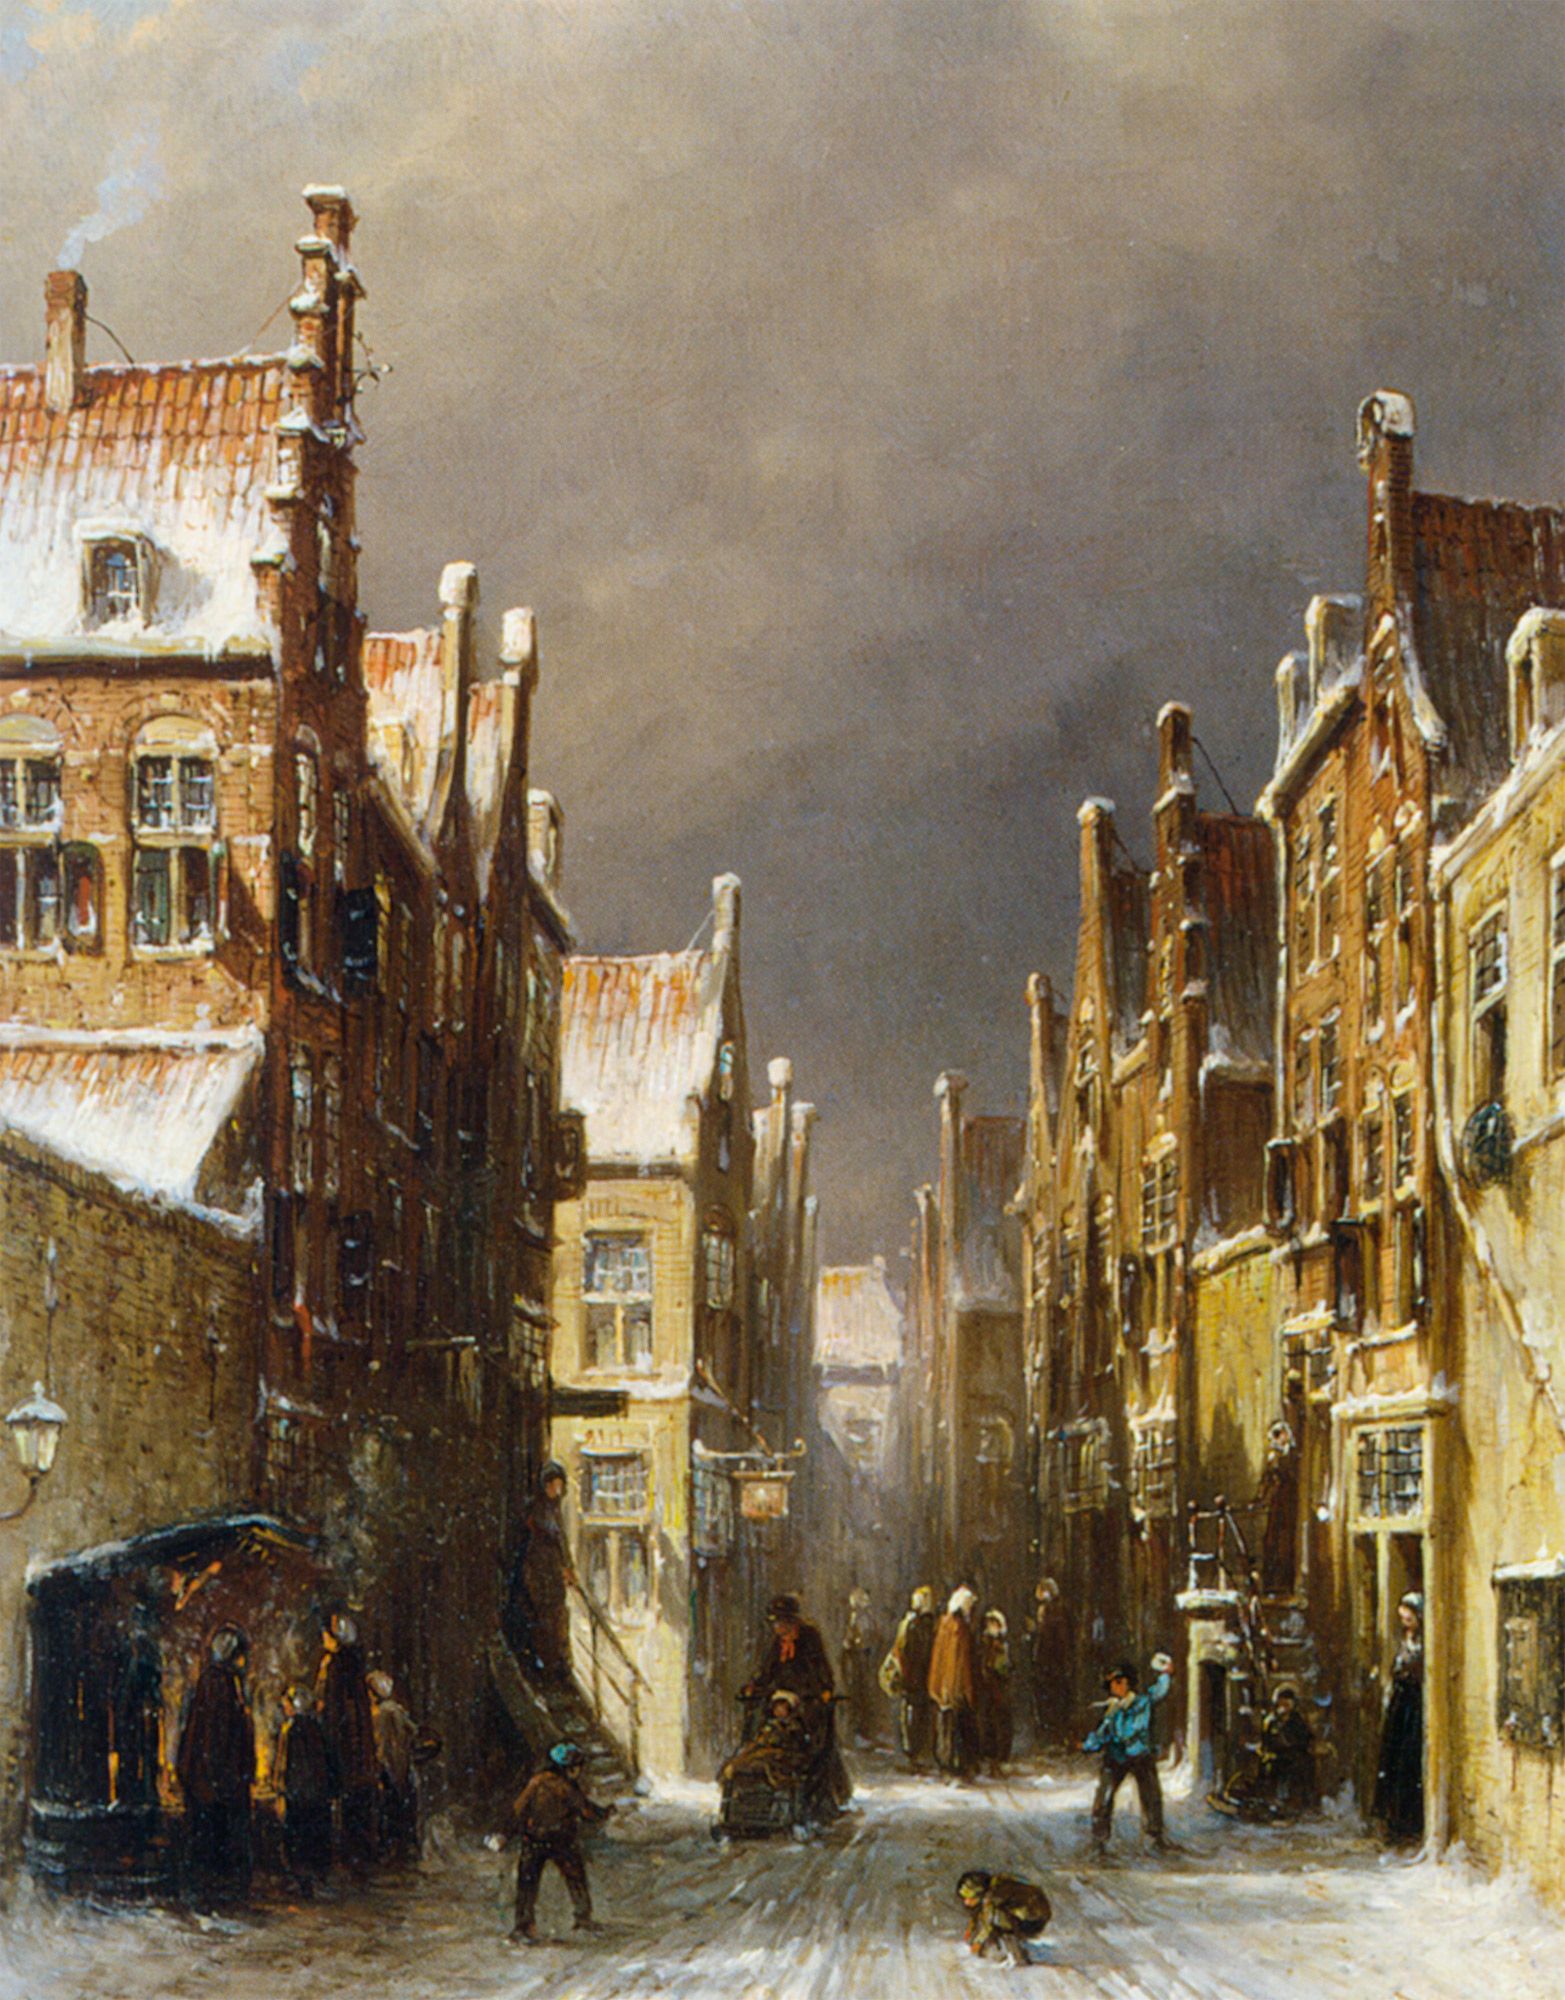 Figures in the Snow Covered Streets of a Dutch Town by Pieter Gerard Vertin